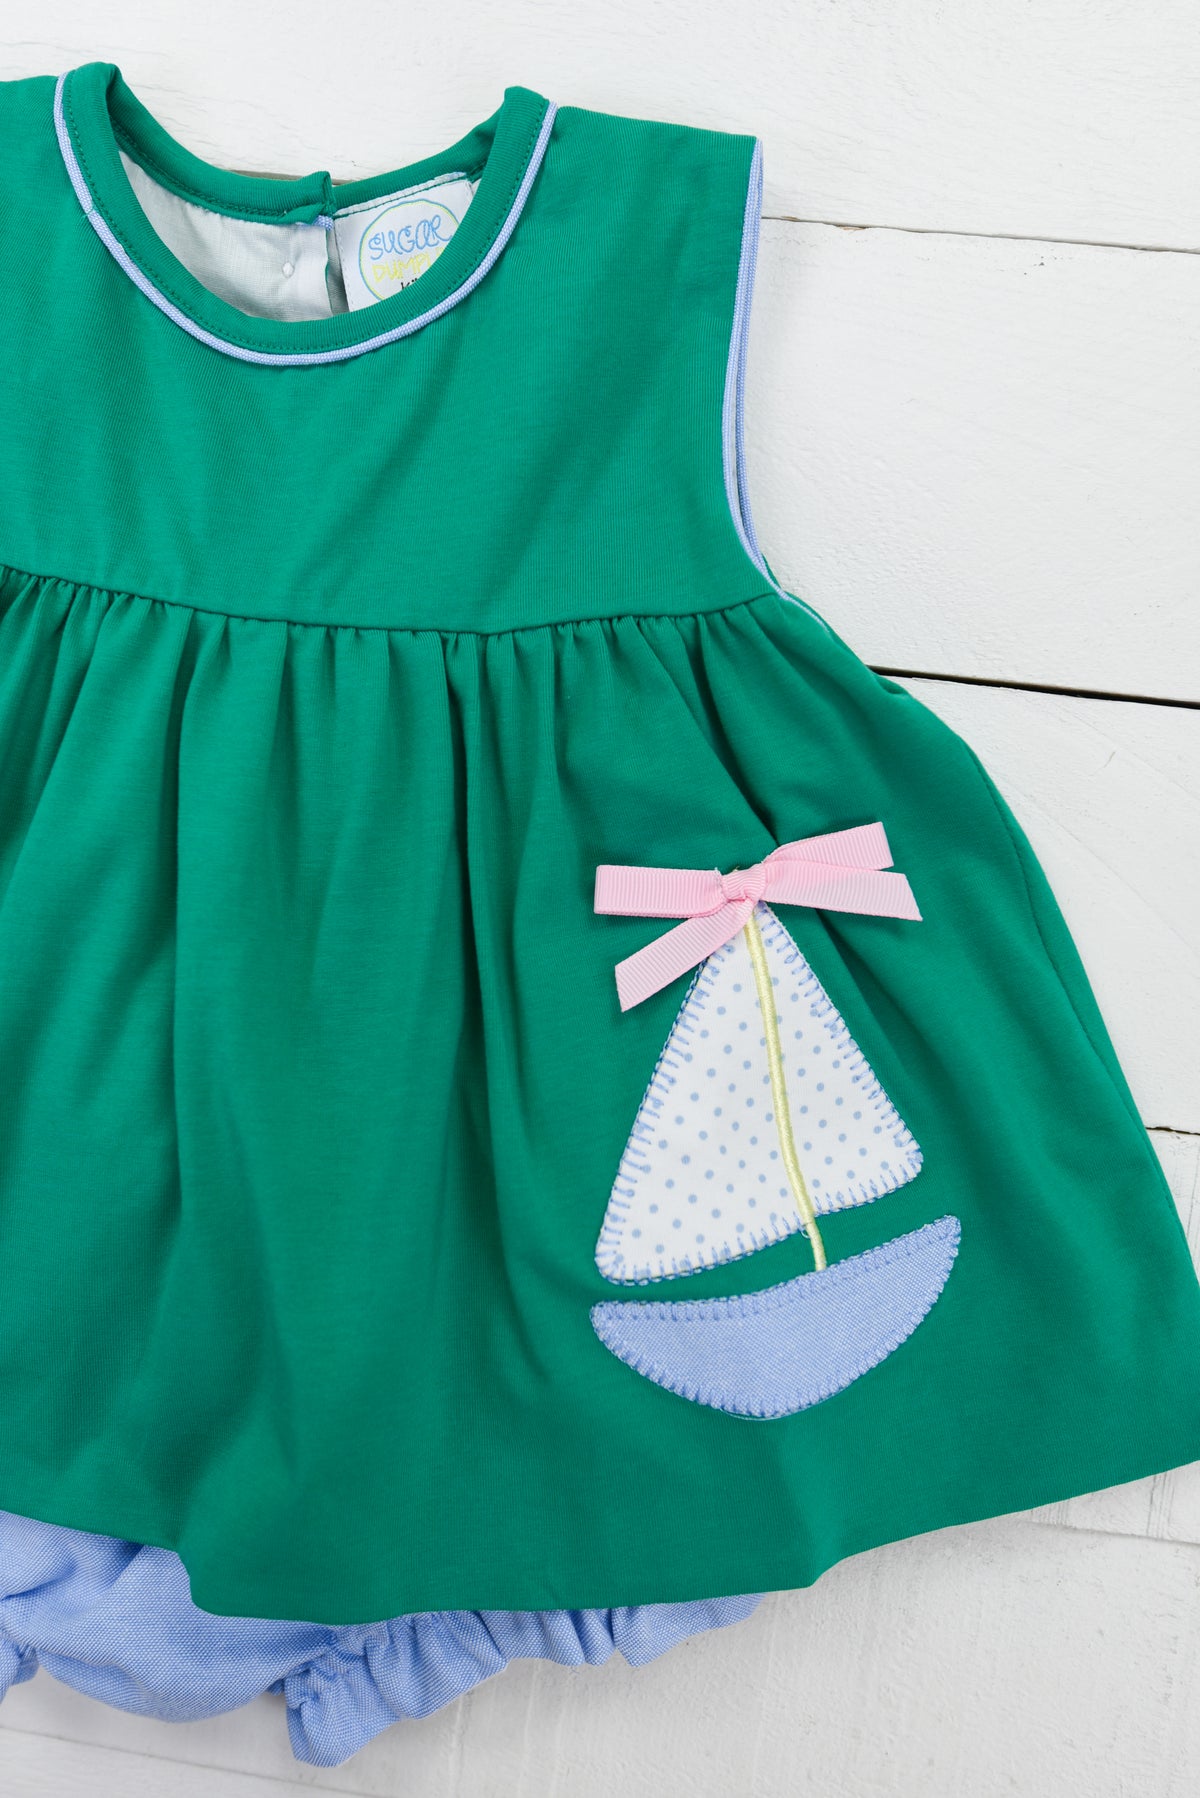 a green dress with a sailboat applique on it